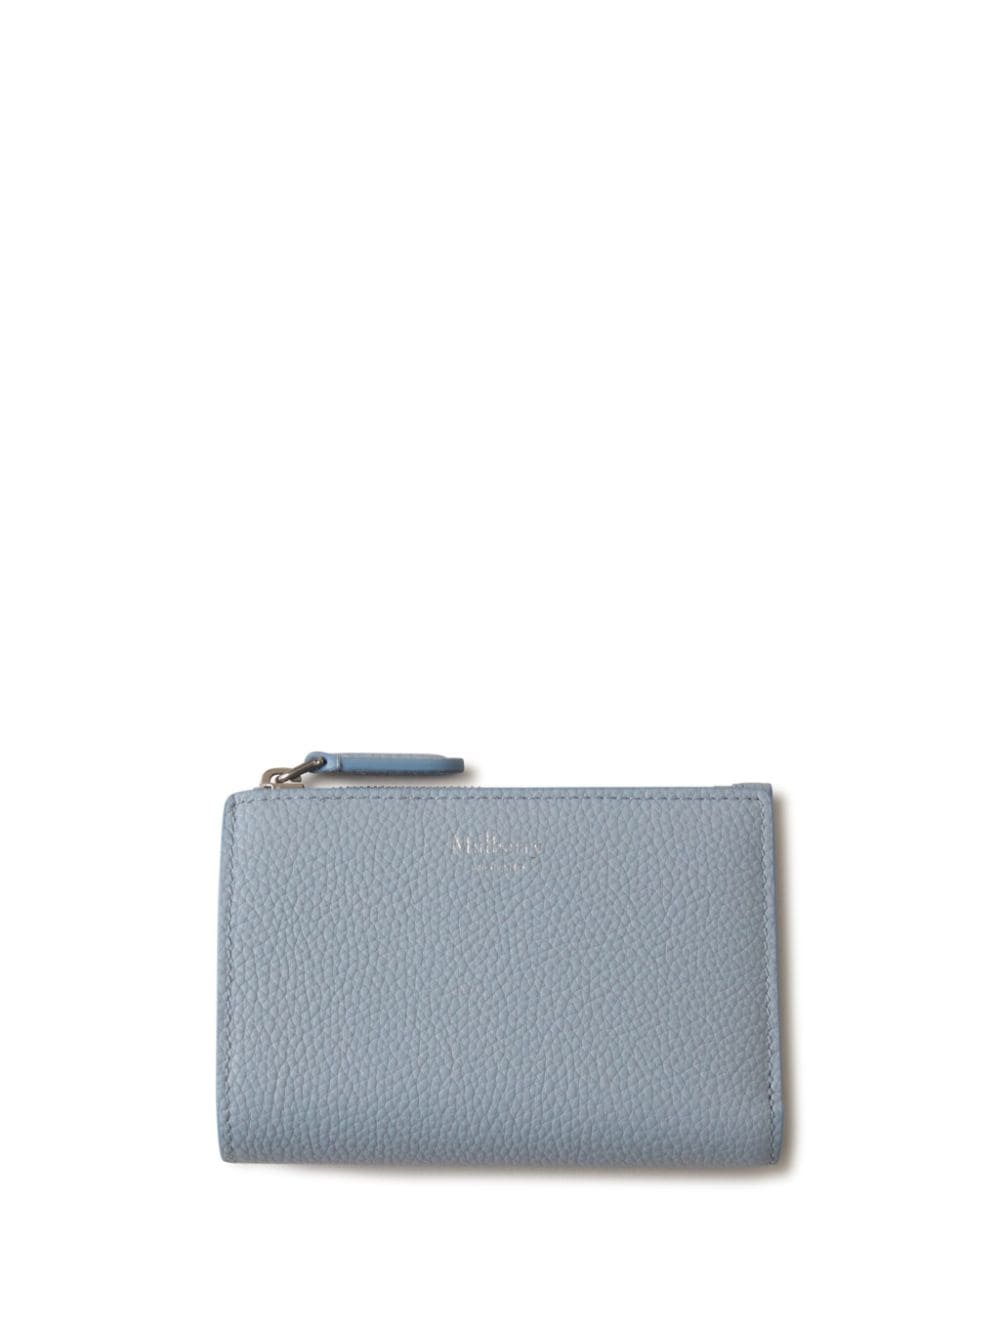 Mulberry Continental Bi-fold Leather Wallet In Grey